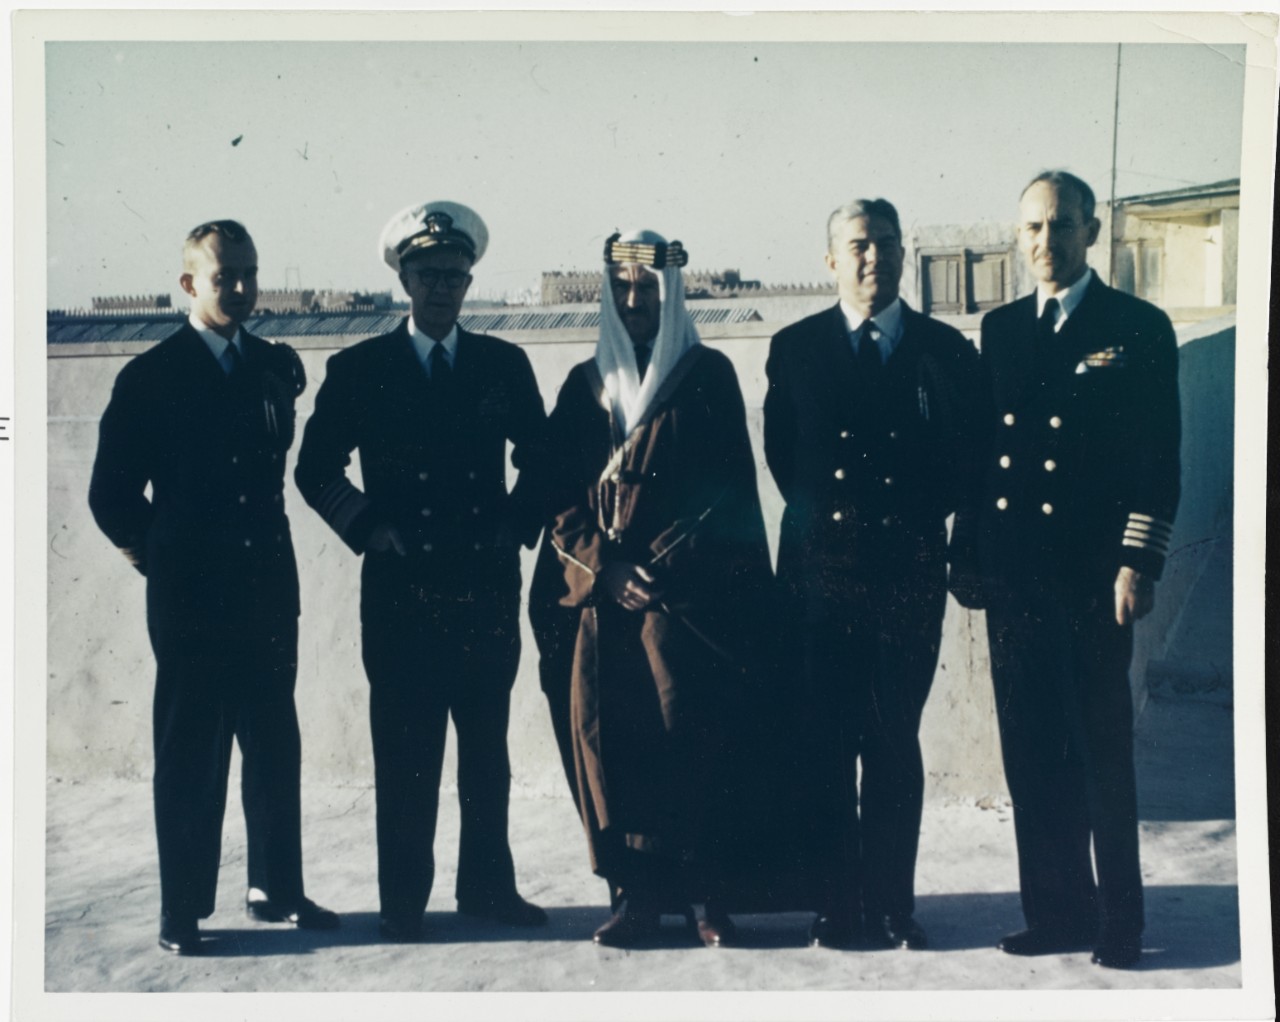 Middle East, possibly in Saudi Arabia, circa 1949-1950. 